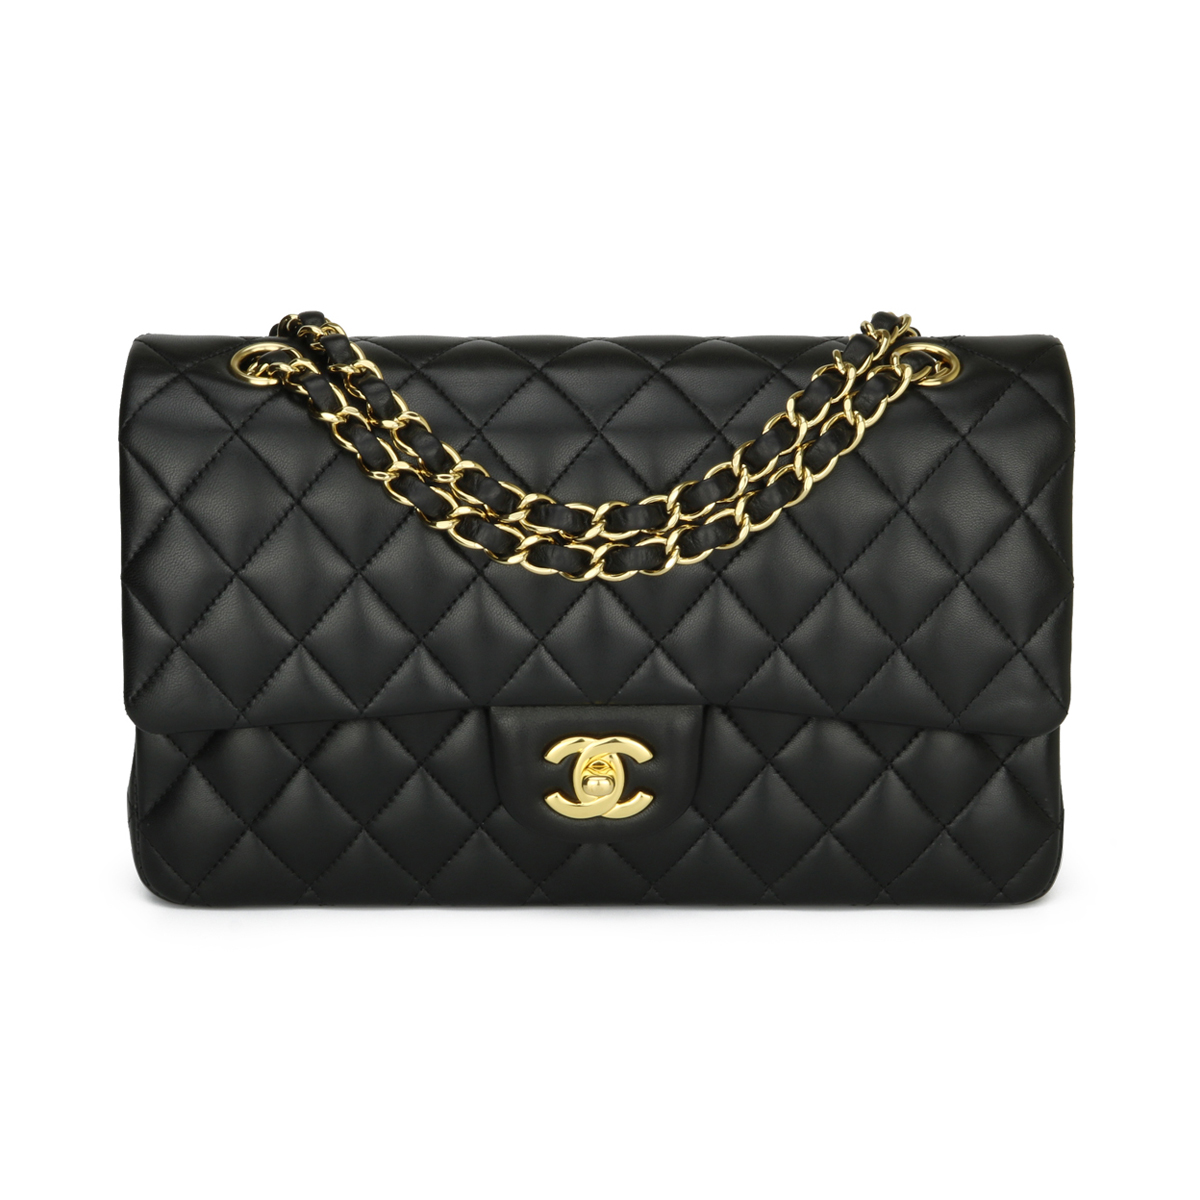 Chanel Quilted Chain Around Clutch Black Lambskin Gold Hardware – Coco  Approved Studio